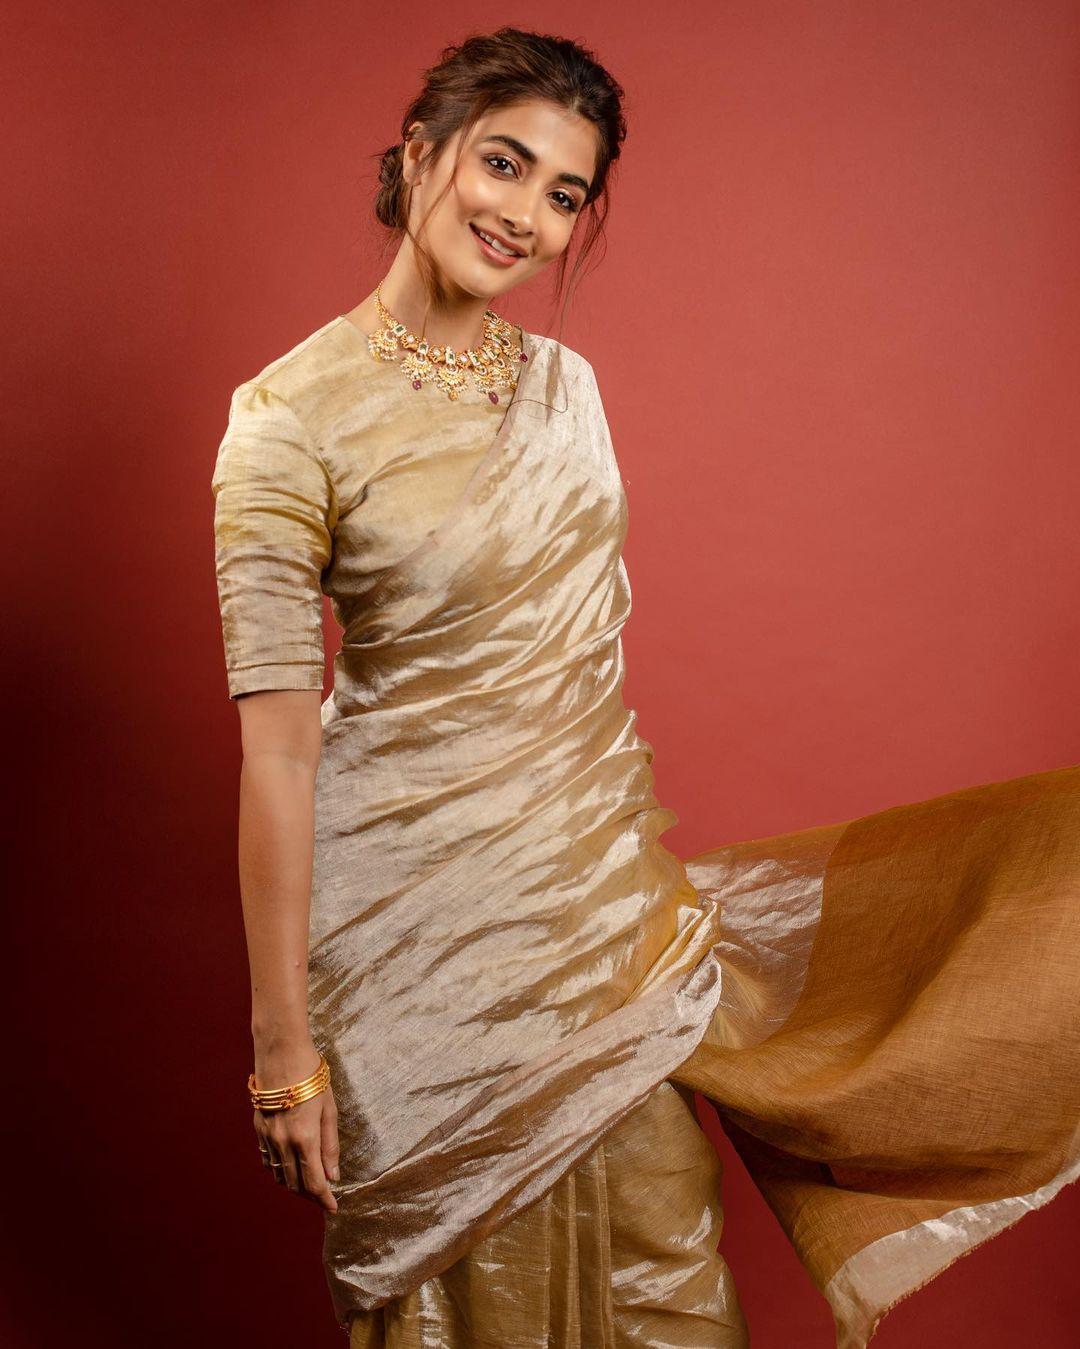 Pooja Hegde looks absolutely stunning in her all-gold linen saree, which she pairs with a stylish half-sleeve blouse. This outfit exudes a sense of luxury, making it a perfect choice for the grand Ashtami celebrations.